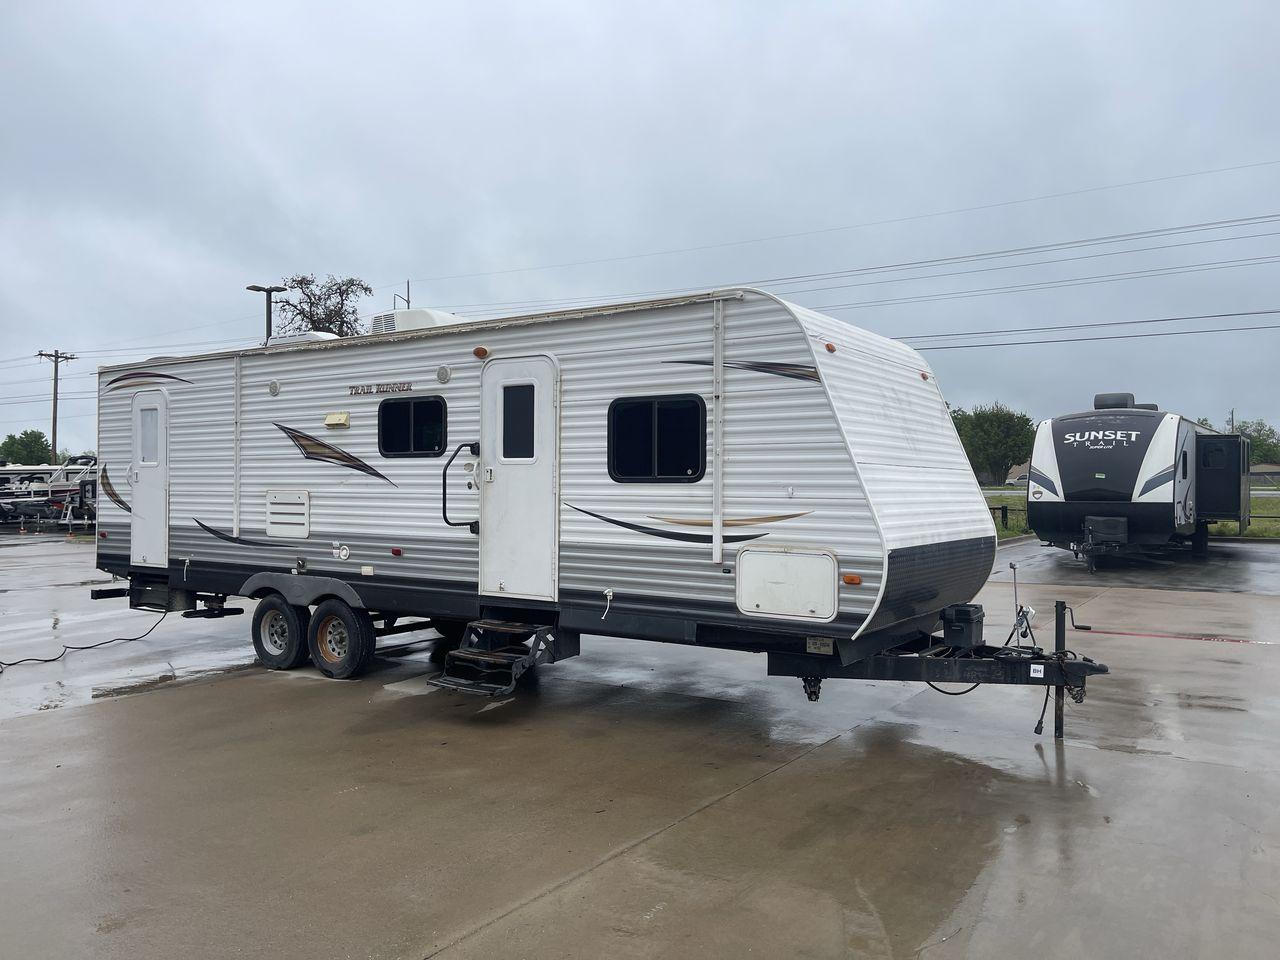 2013 TRAIL RUNNER 29FQBS (5SFEB3228DE) , Length: 32.33 ft. | Dry Weight: 6,724 lbs. | Slides: 1 transmission, located at 4319 N Main St, Cleburne, TX, 76033, (817) 678-5133, 32.385960, -97.391212 - This 2013 Trail Runner 29FQBS is a single-slide travel trailer measuring approximately 32.33 feet long. It has a dry weight of 6,724 lbs. and a carrying capacity of 2,276 lbs. It also has a manageable hitch weight of 738 lbs. As you enter the camper, you will find the kitchen section immediately to - Photo #22